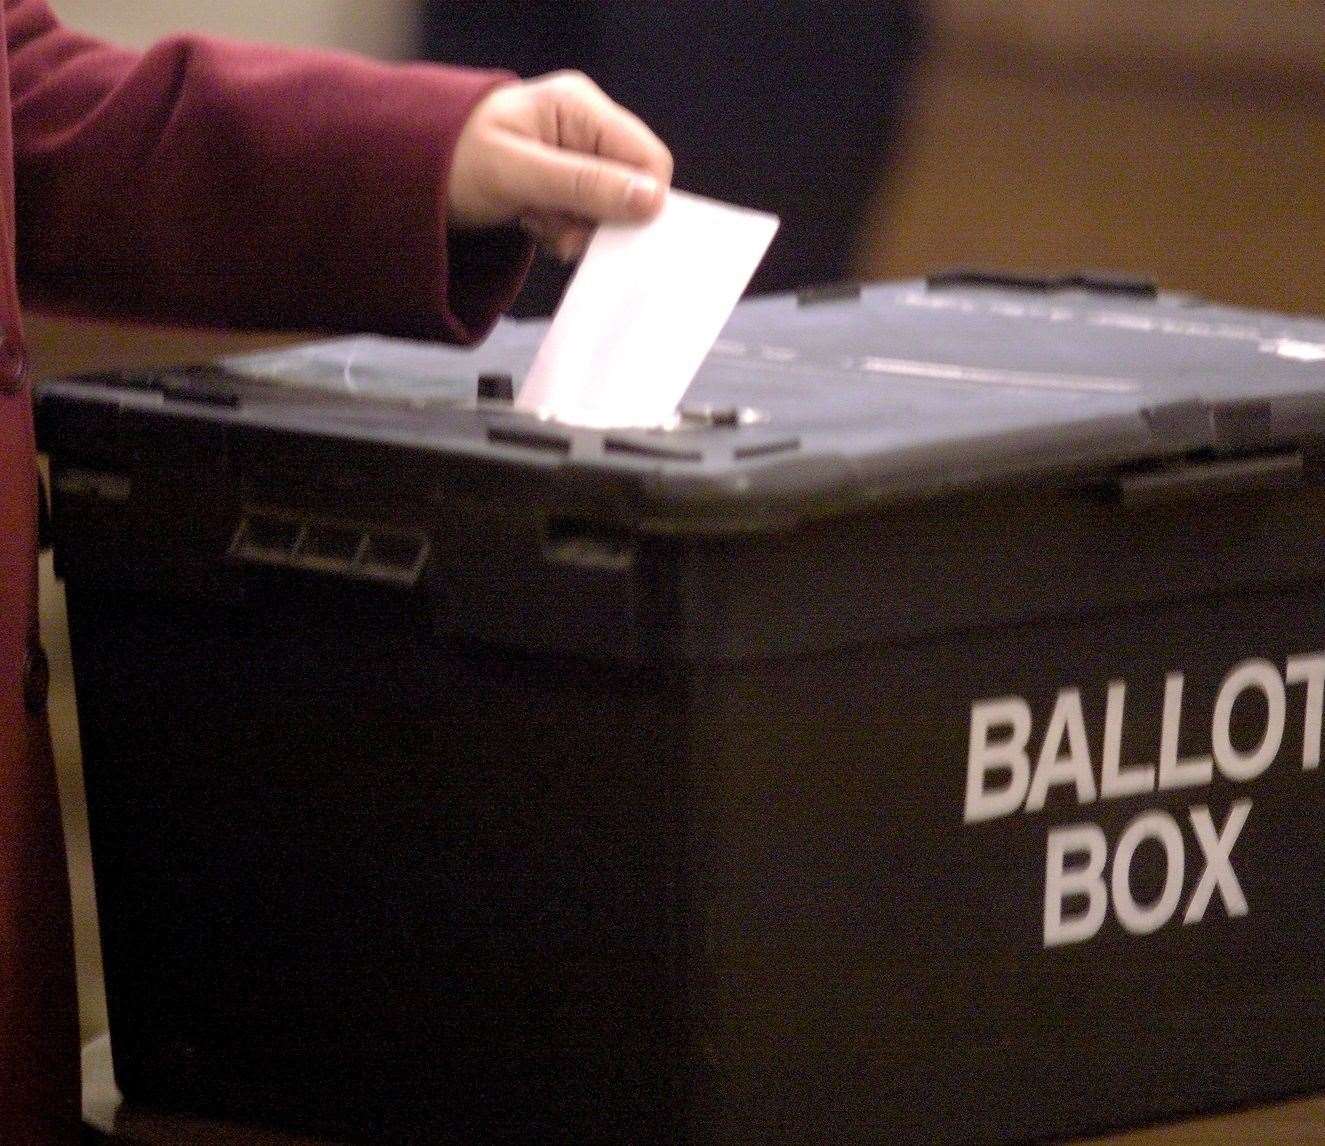 Only a third of the candidates for the upcoming local elections in Kent are women